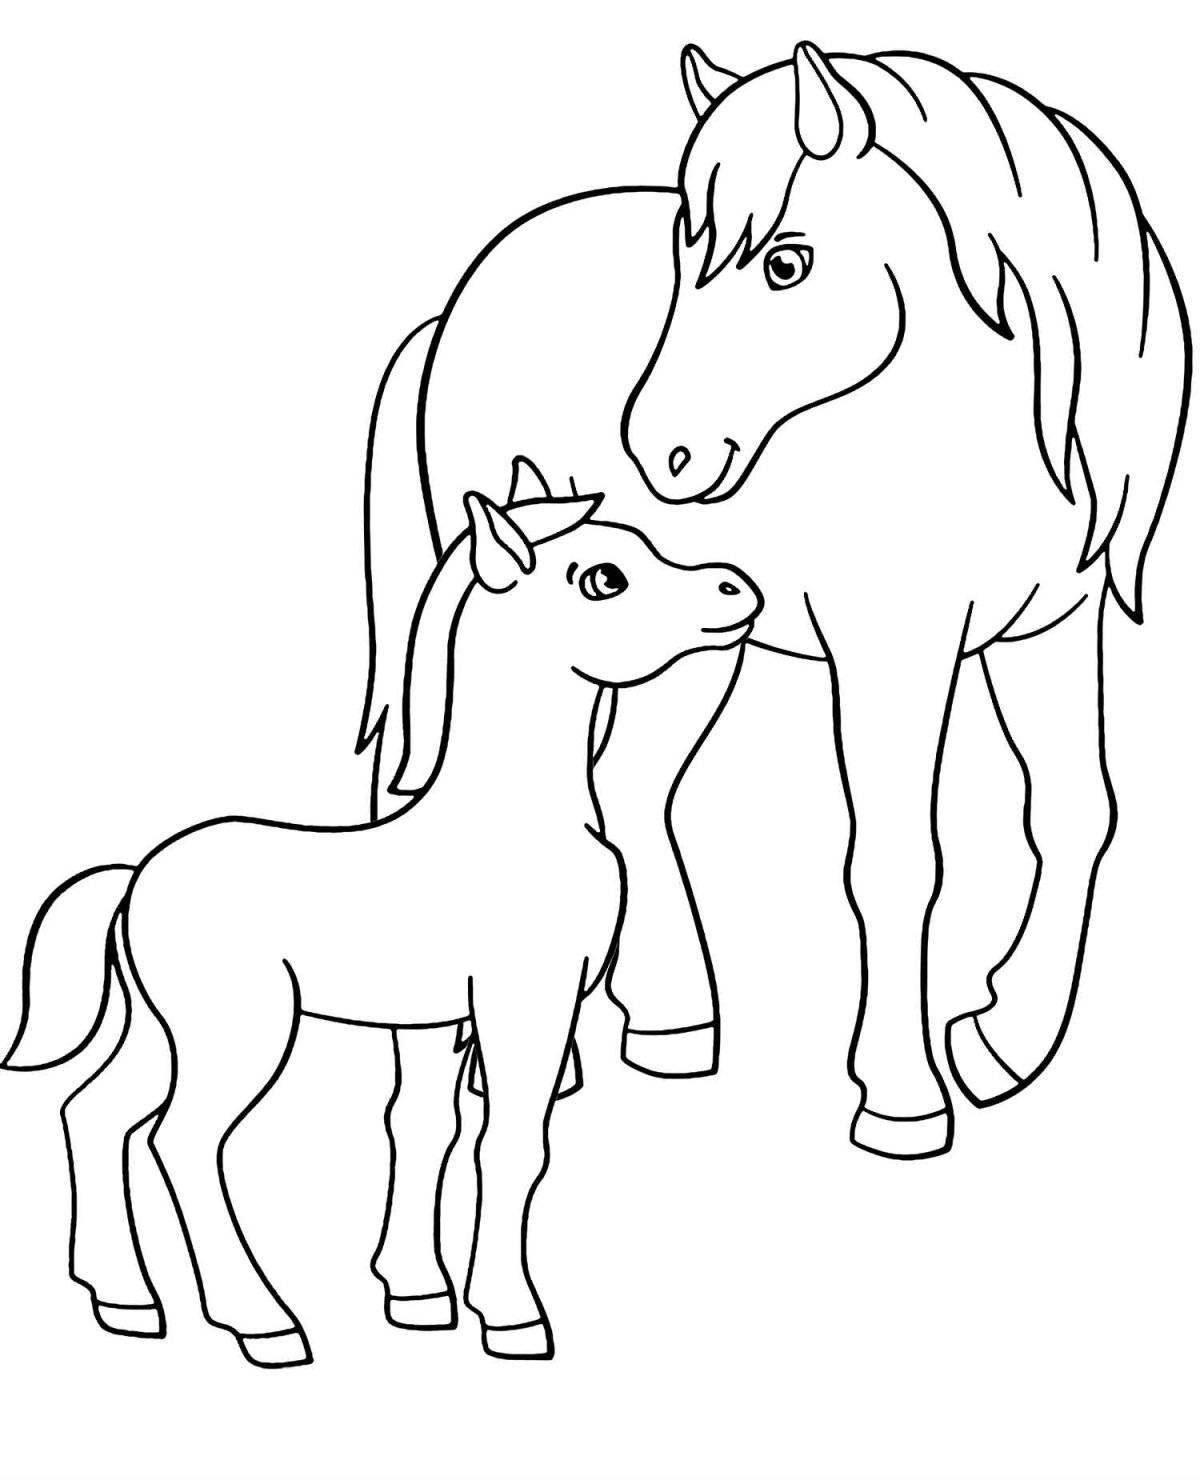 Exciting horse family coloring book